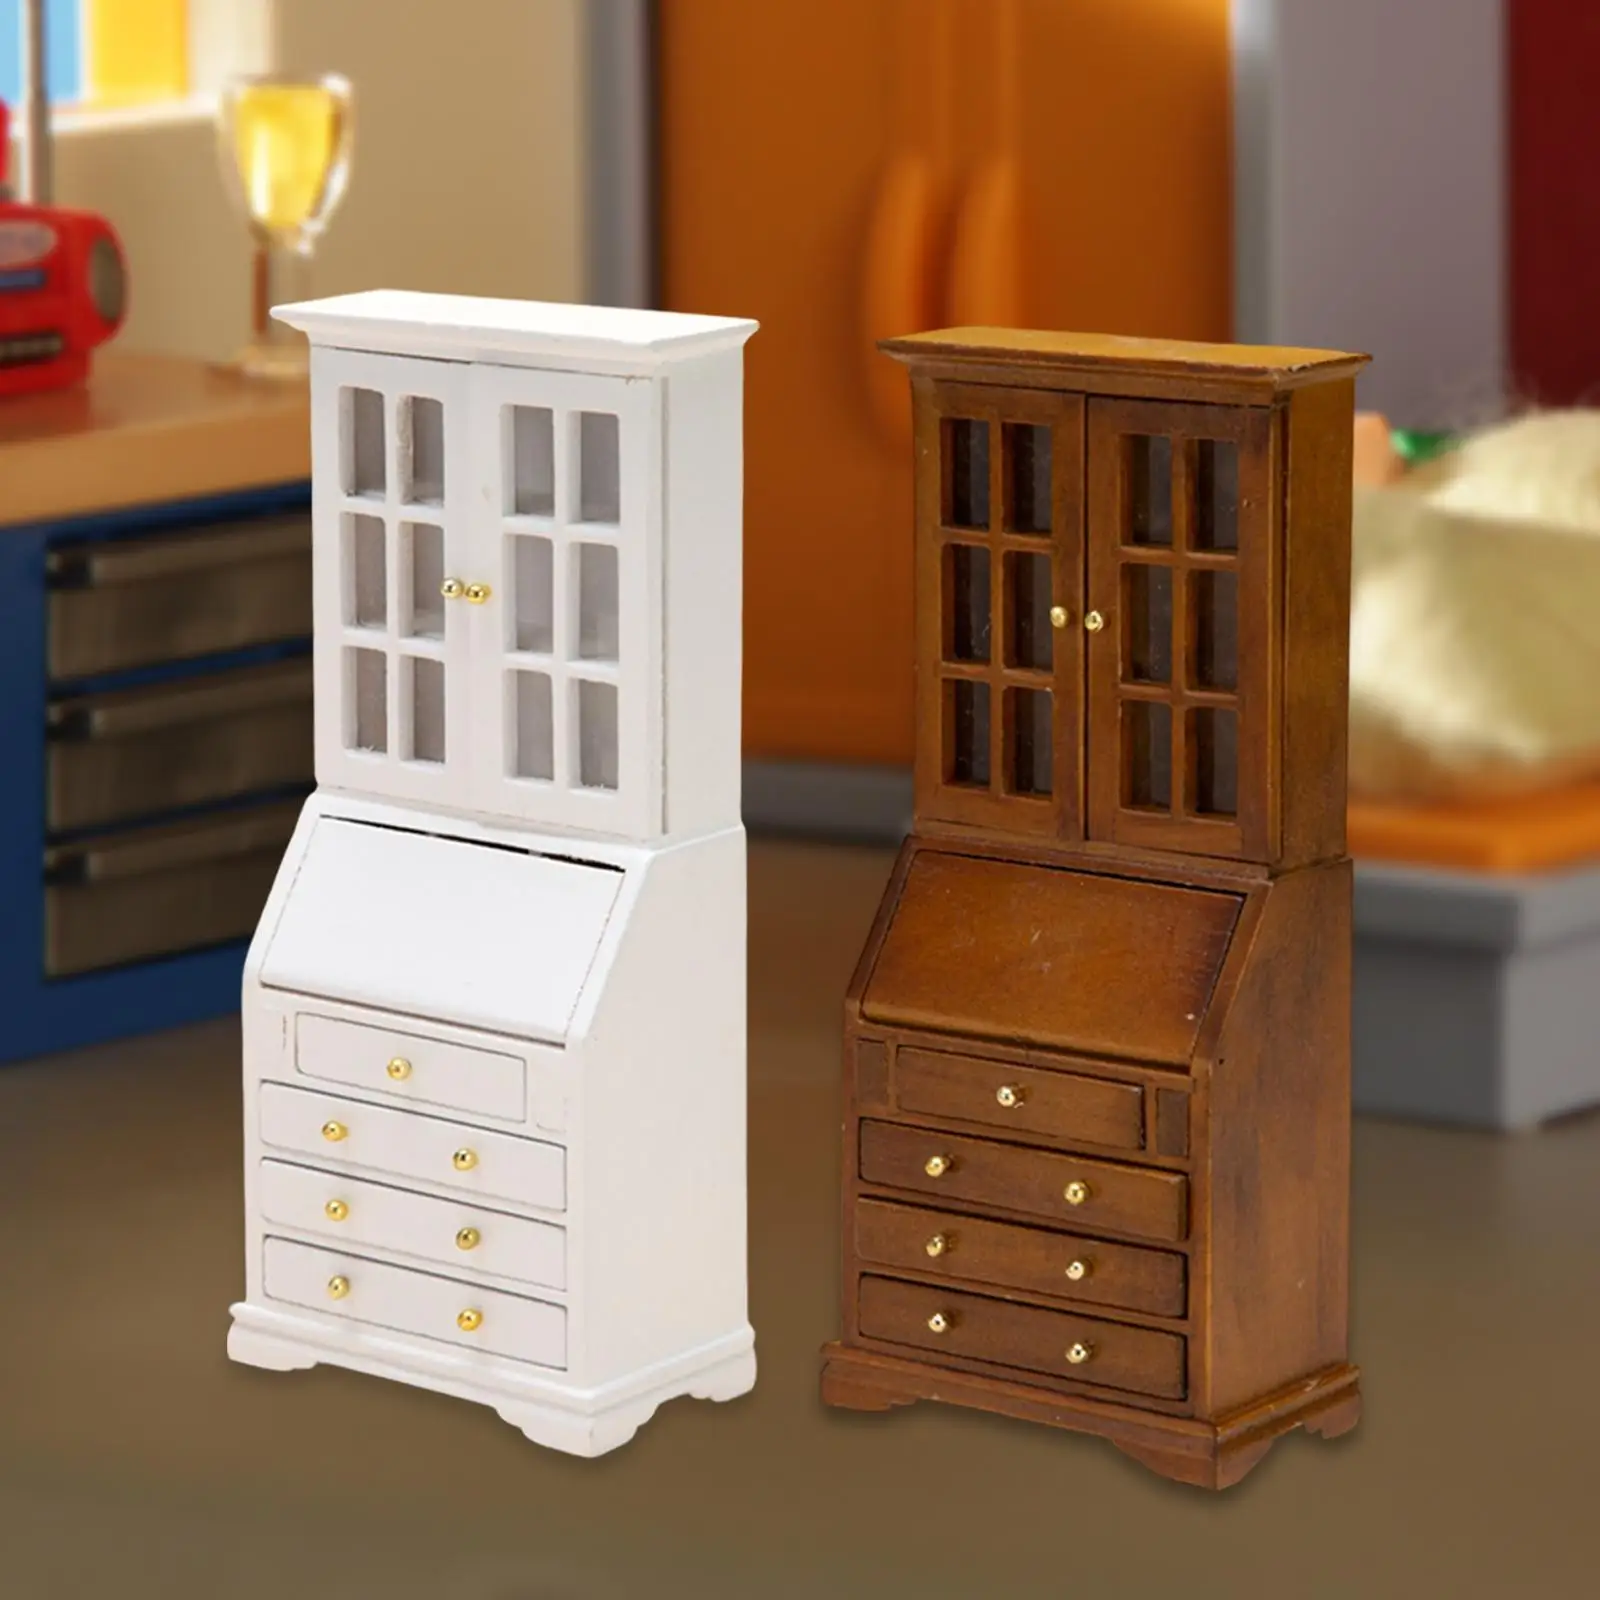 1/12 Dollhouse Bookcase with Drawers Miniature Wood Furniture Professional